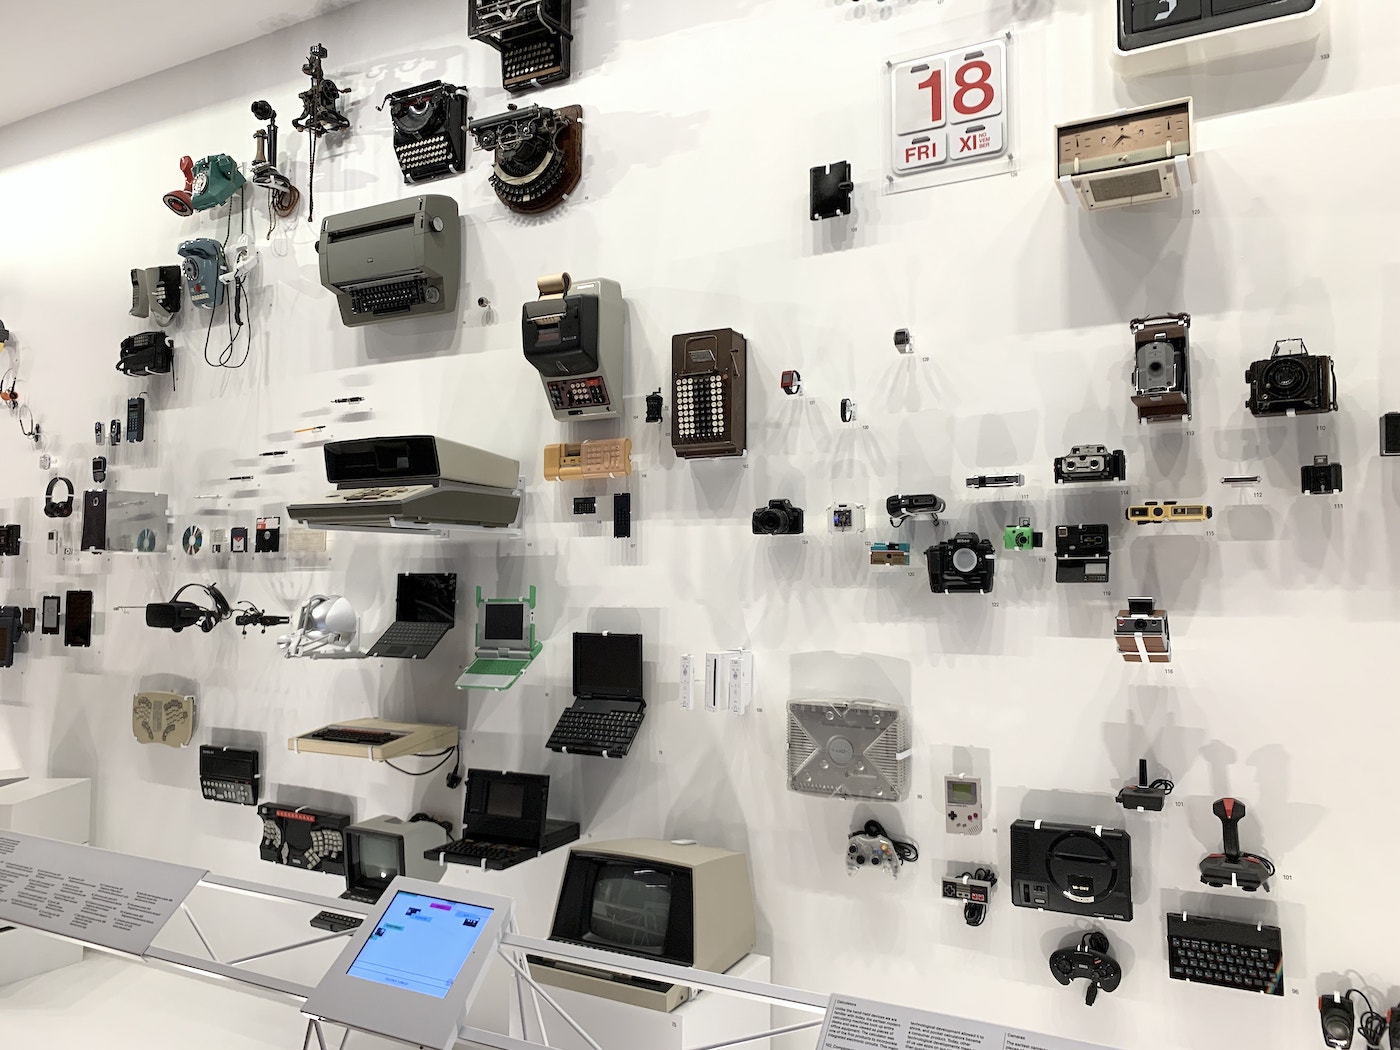 A collection of computing tools displayed on a wall, London Design Museum